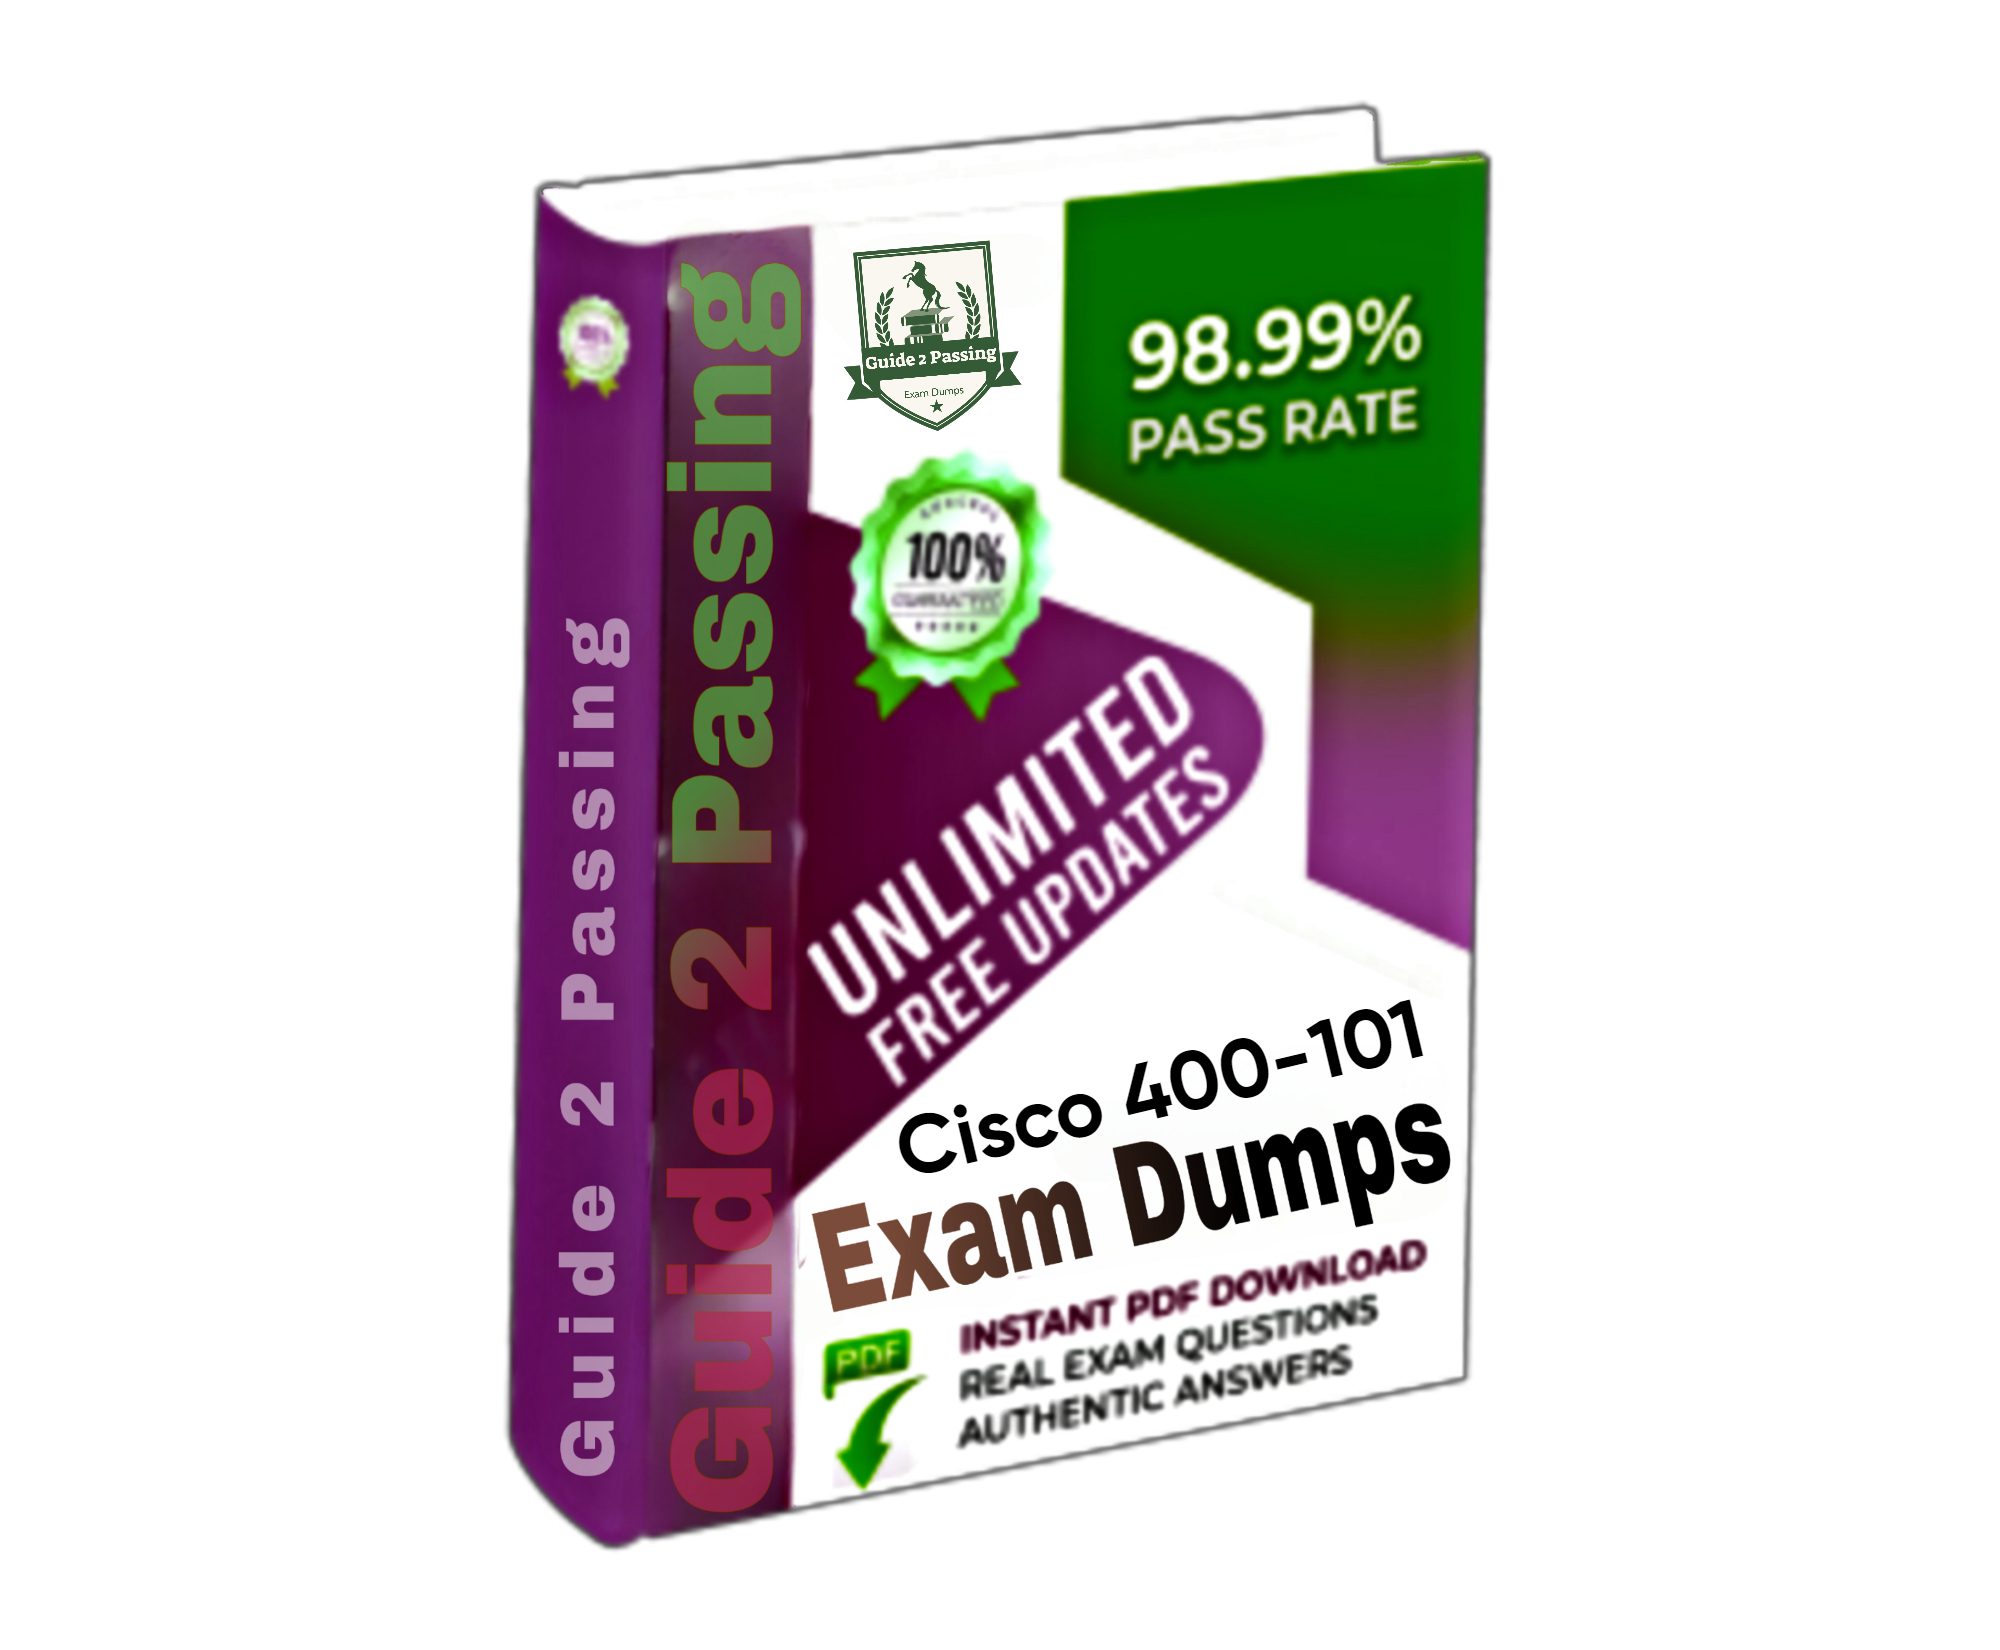 Pass Your Cisco 400-101 Exam Dumps From Guide 2 Passing